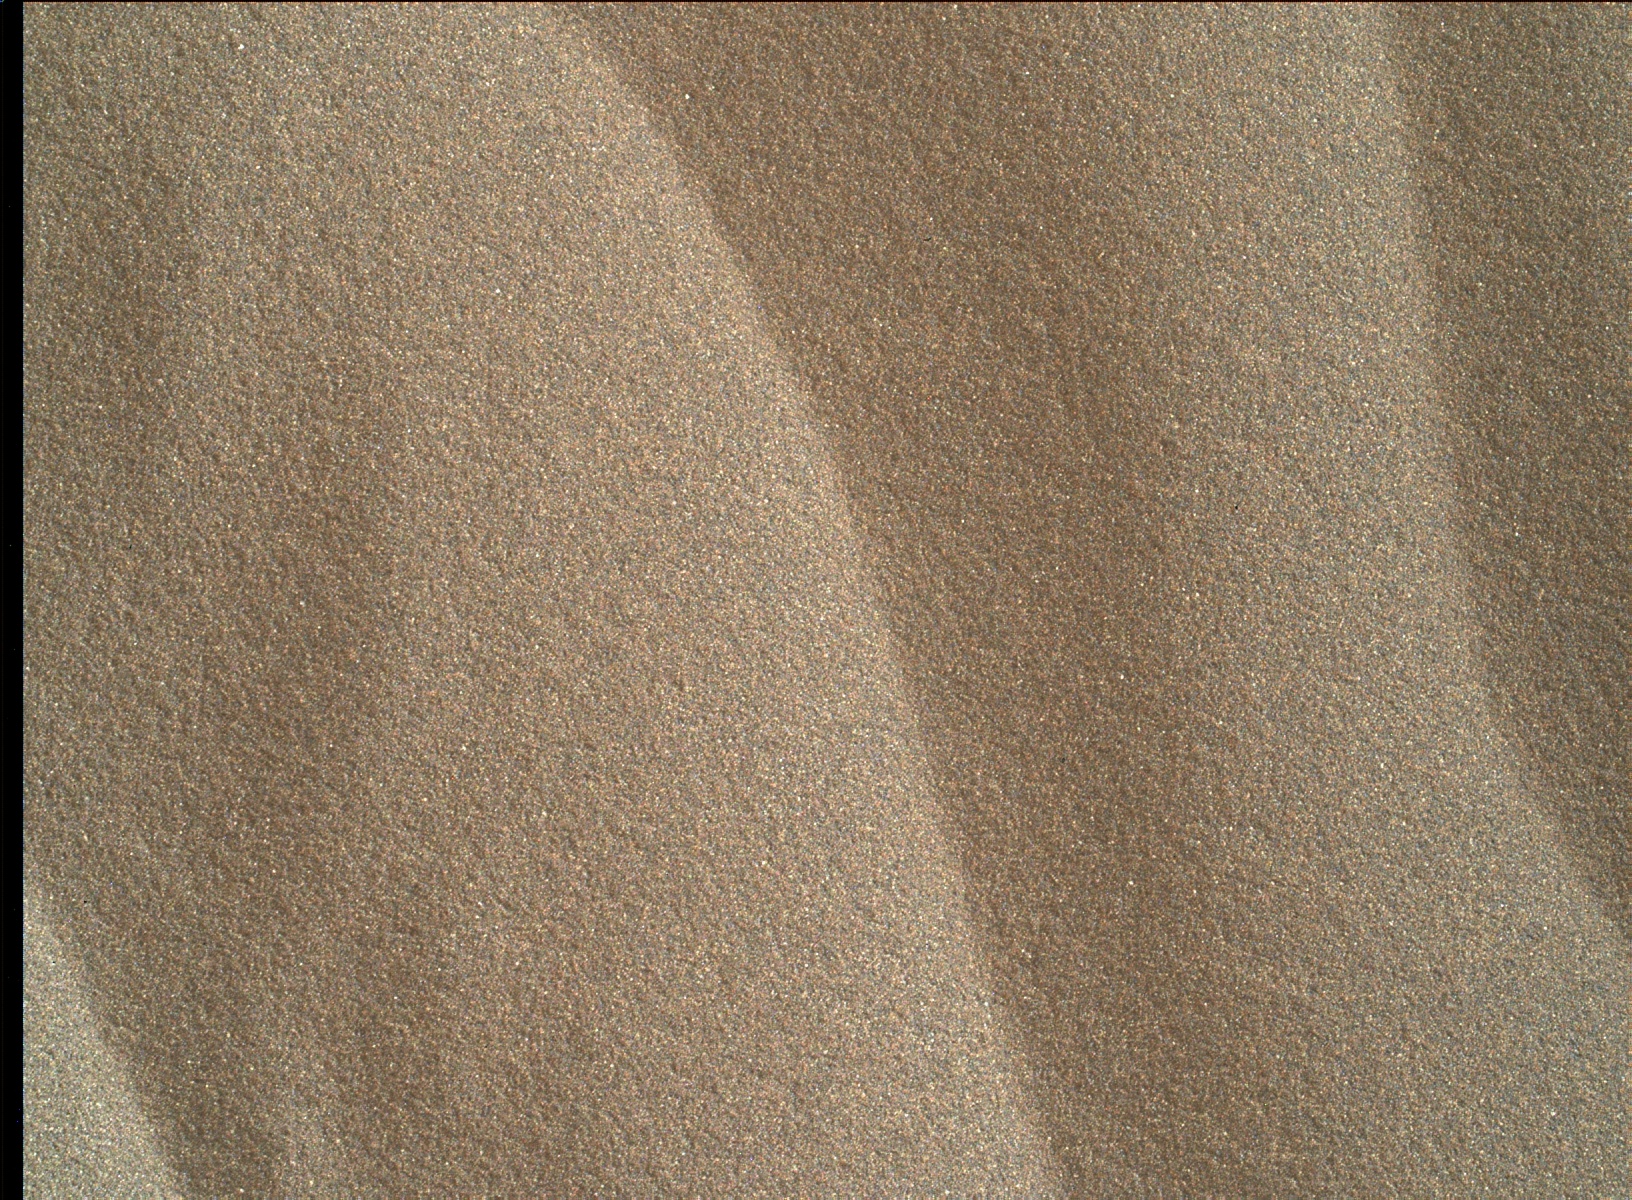 Nasa's Mars rover Curiosity acquired this image using its Mars Hand Lens Imager (MAHLI) on Sol 2025